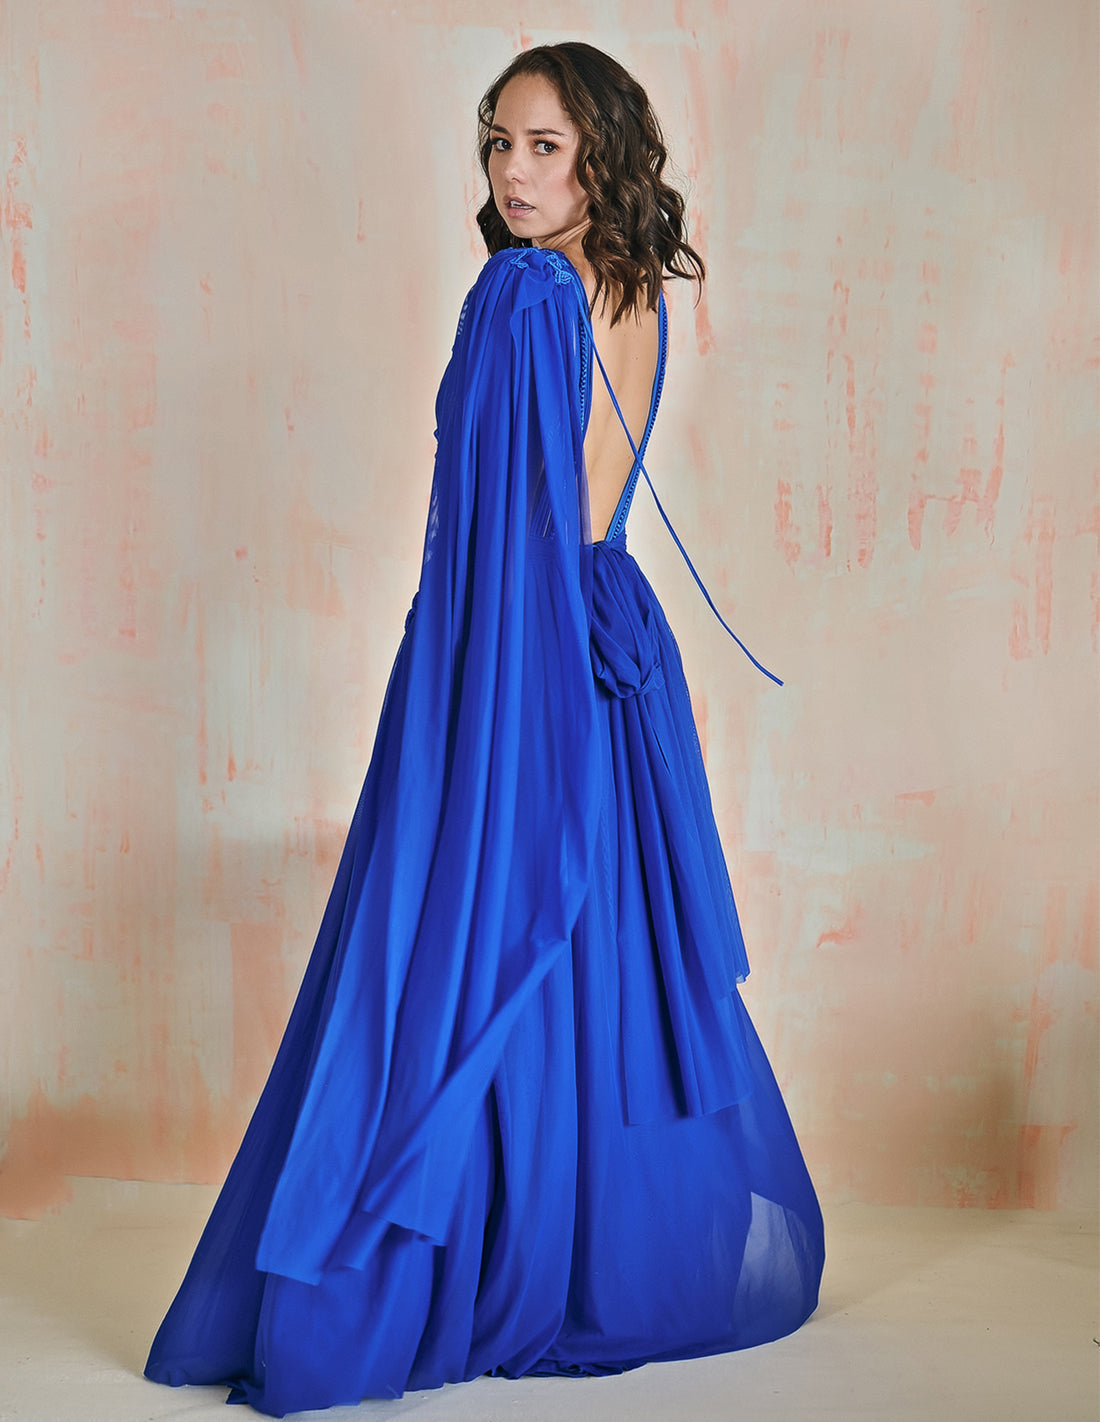 Copérnico Dress King Blue. Hand-Dyed Dress With Hand Woven Macramé In King Blue. Entreaguas